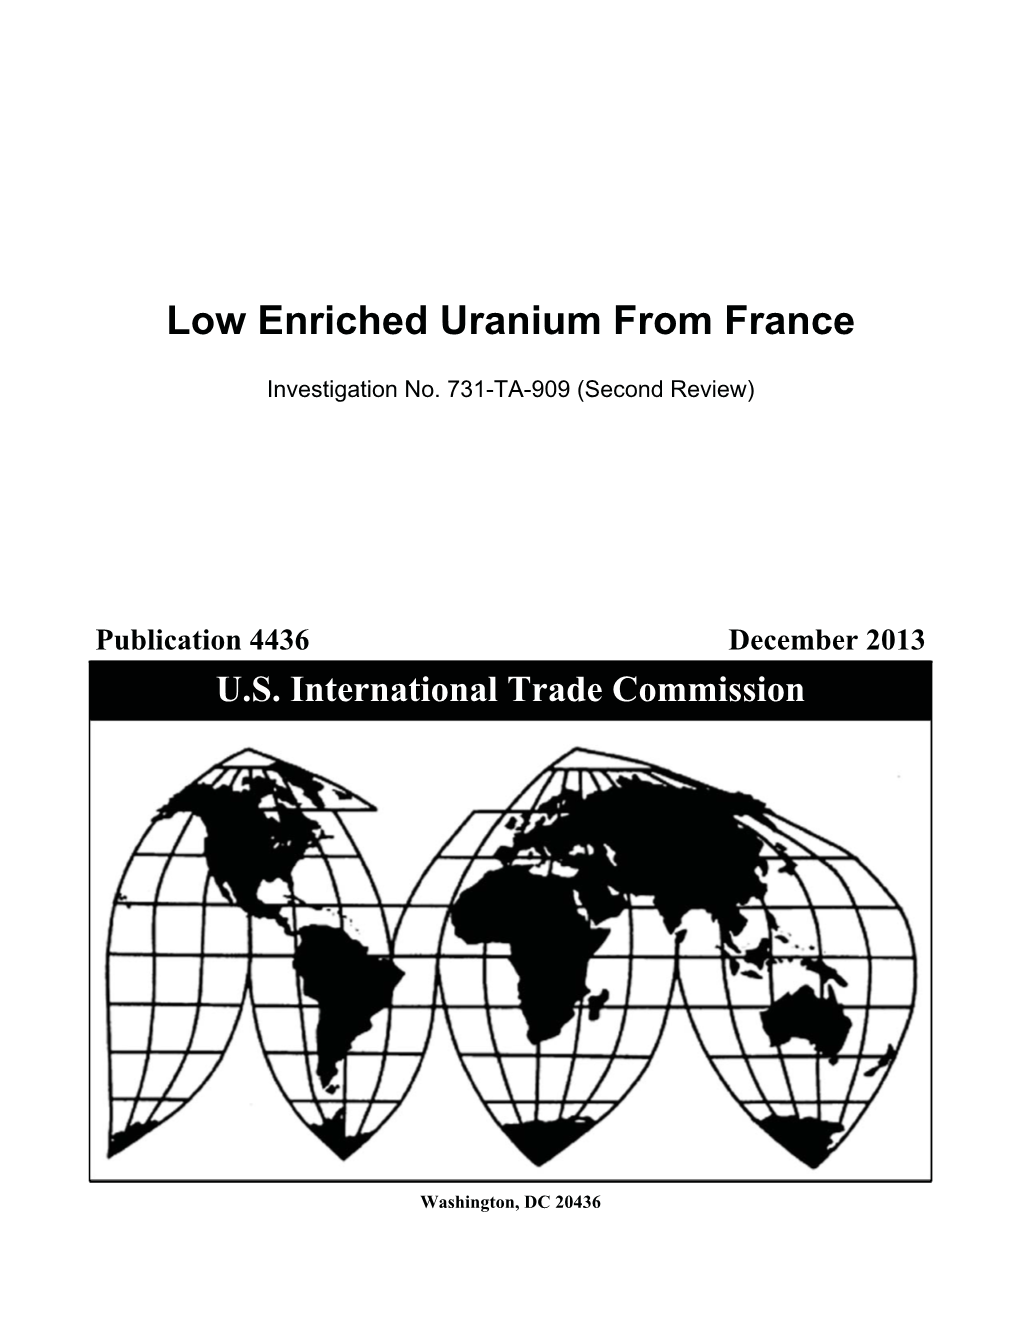 Low Enriched Uranium from France